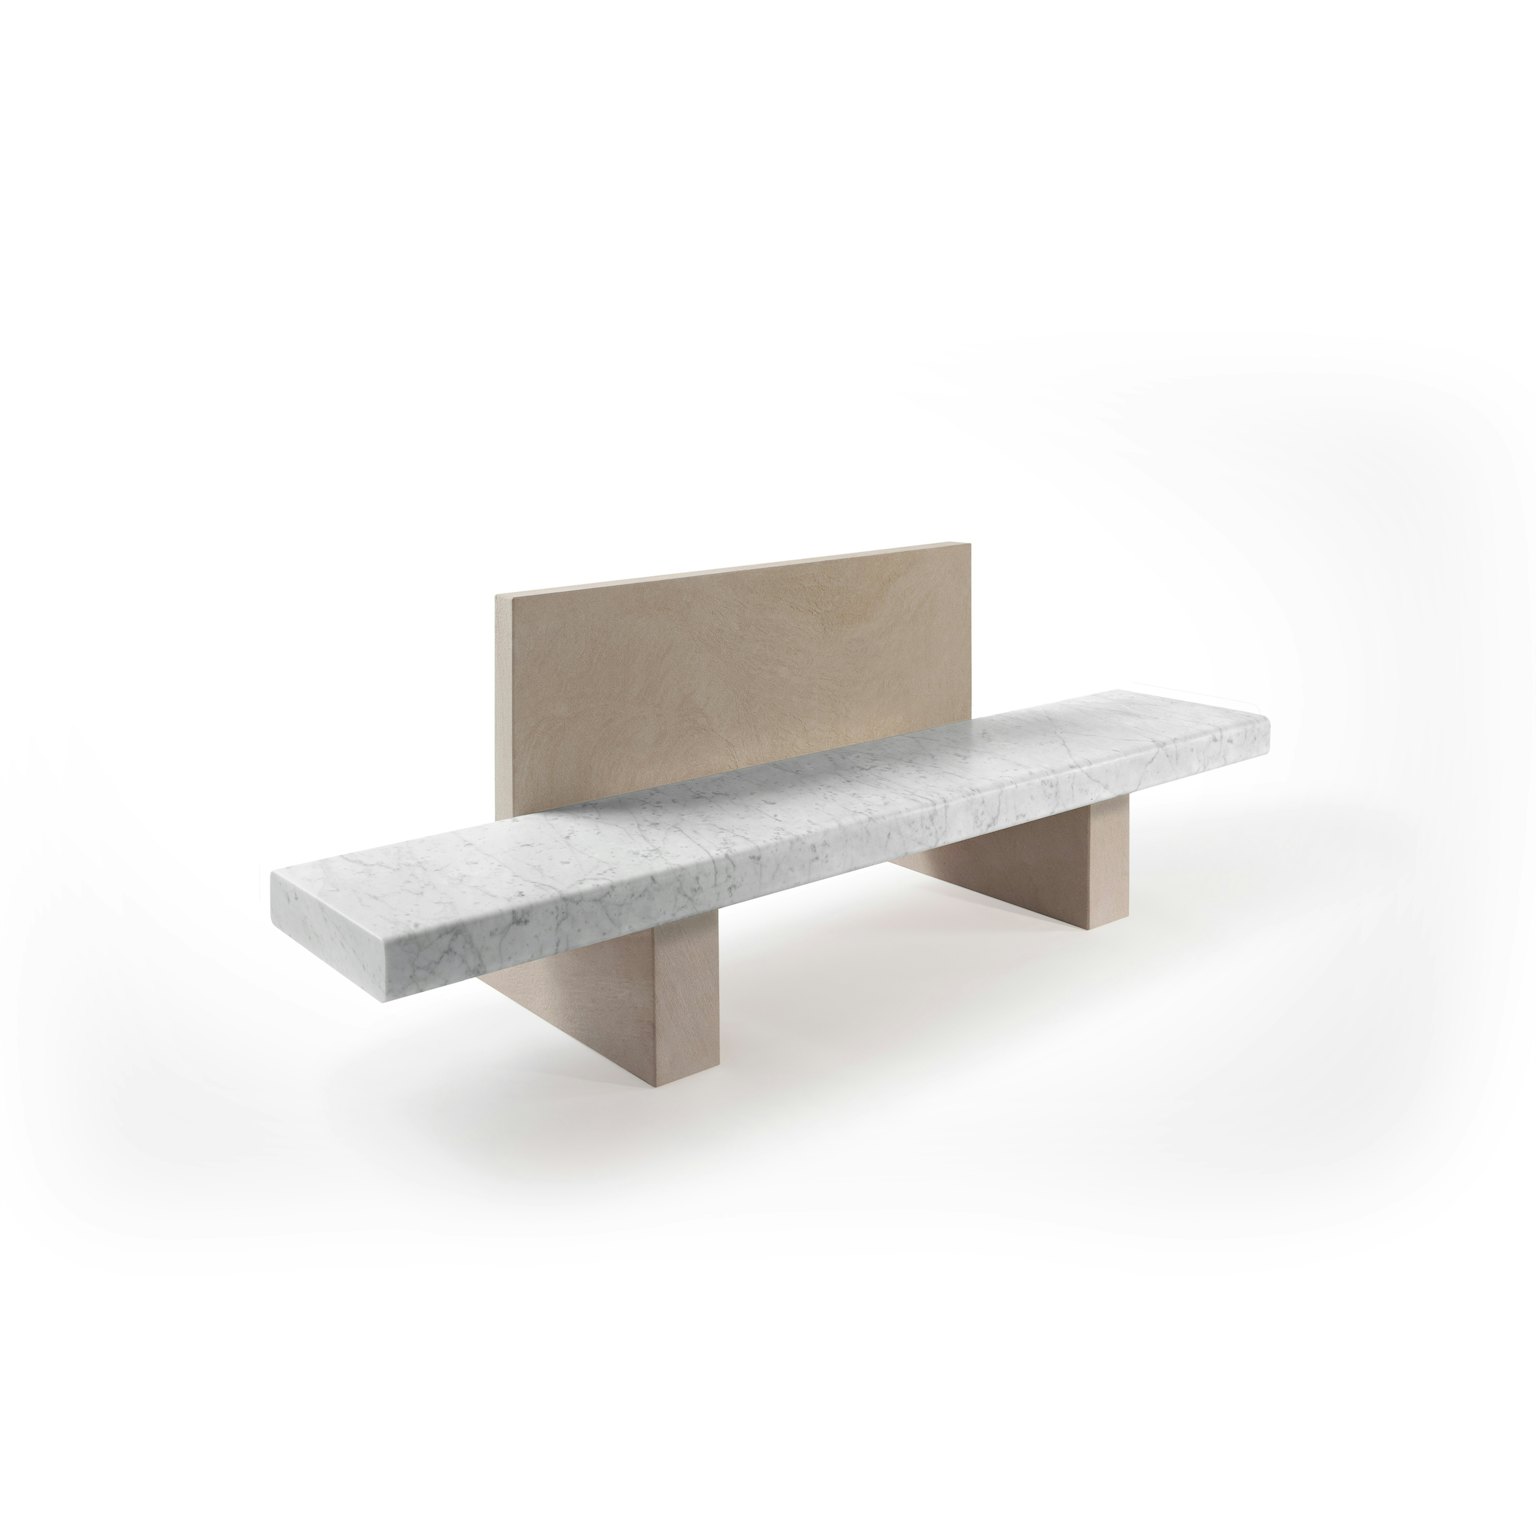 2019-03-salvatori_span-outdoor_bench-with-back-support-2